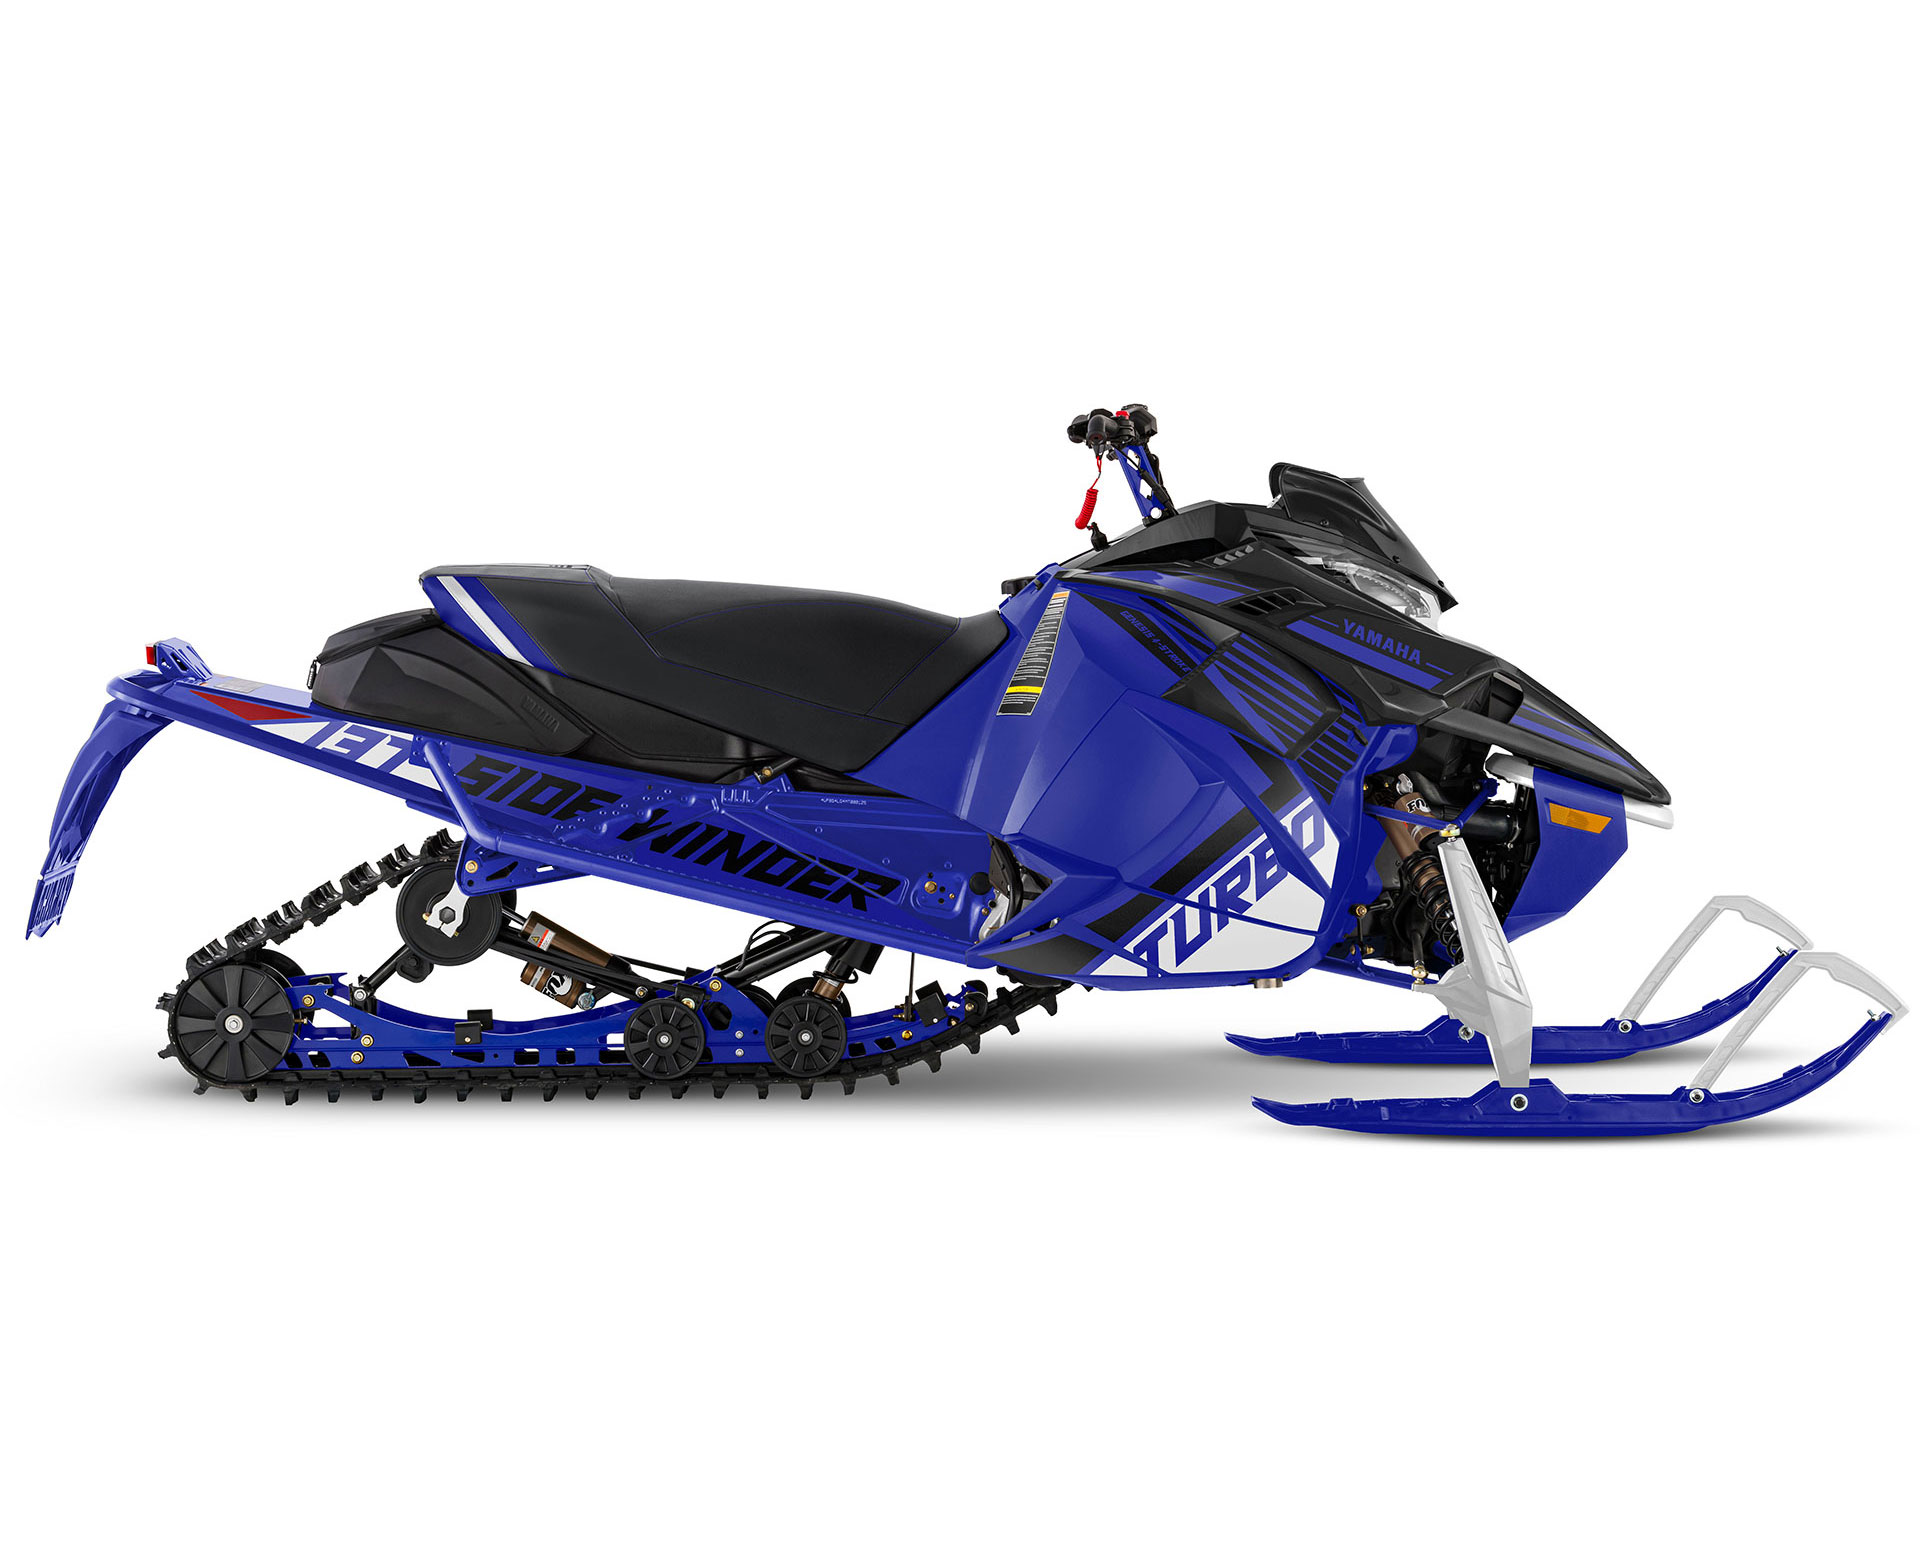 Thumbnail of your customized Sidewinder L-TX LE EPS 2024